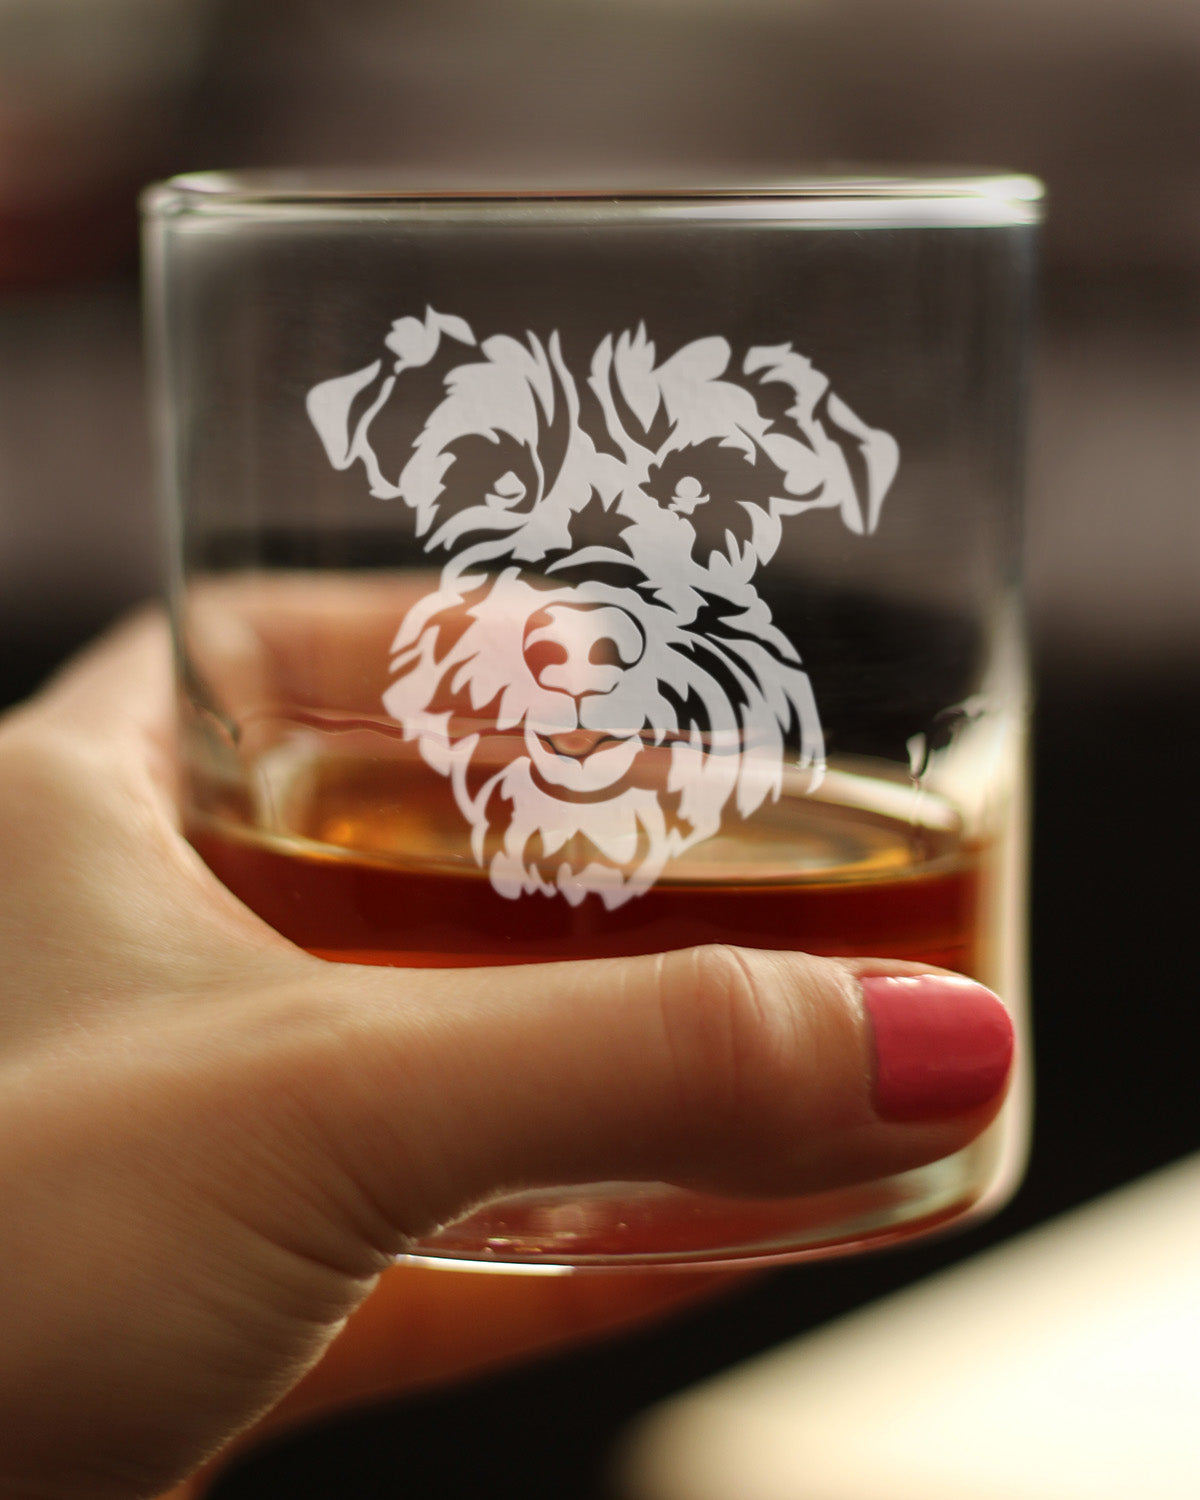 Schnauzer Face Whiskey Rocks Glass - Unique Dog Themed Decor and Gifts for Moms &amp; Dads of Schnauzers - 10.25 Oz